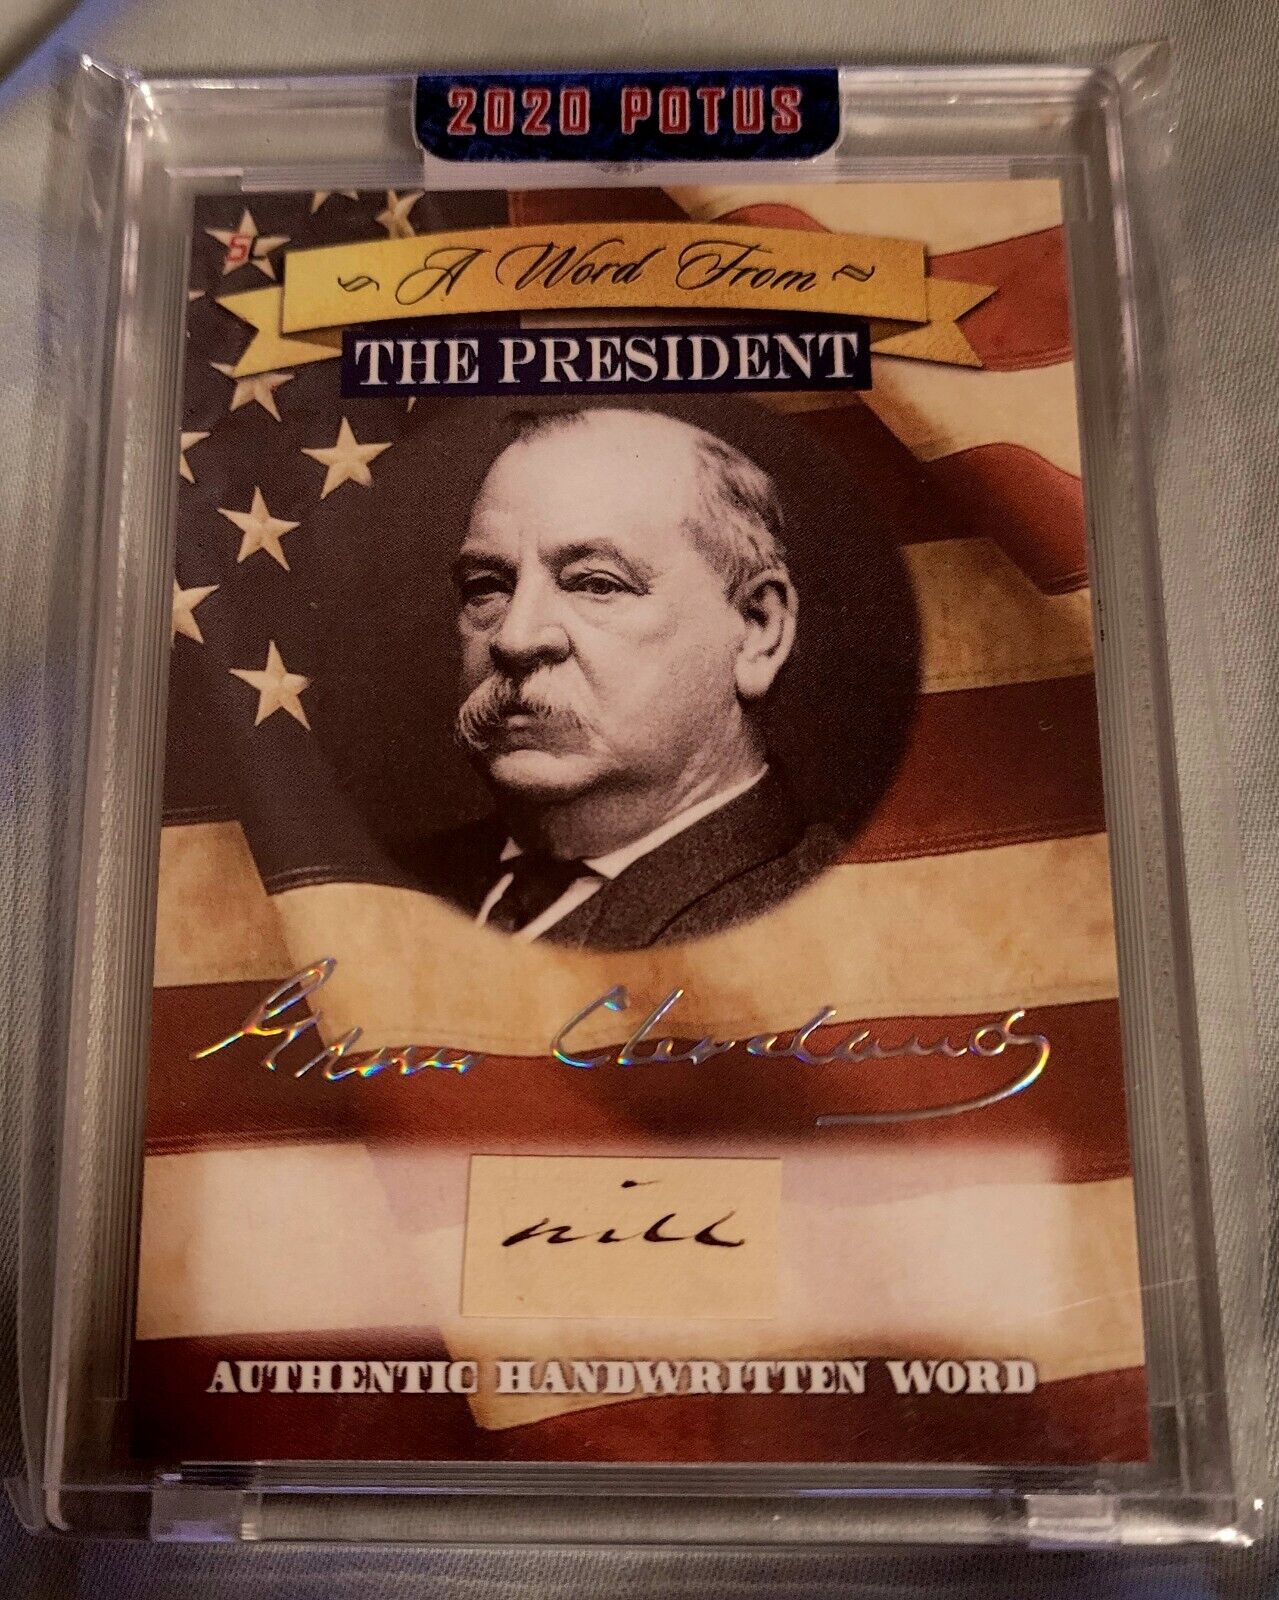 2020 POTUS WORD FROM THE PRESIDENT *GROVER CLEVELAND* AUTHENTIC HANDWRITTEN WORD